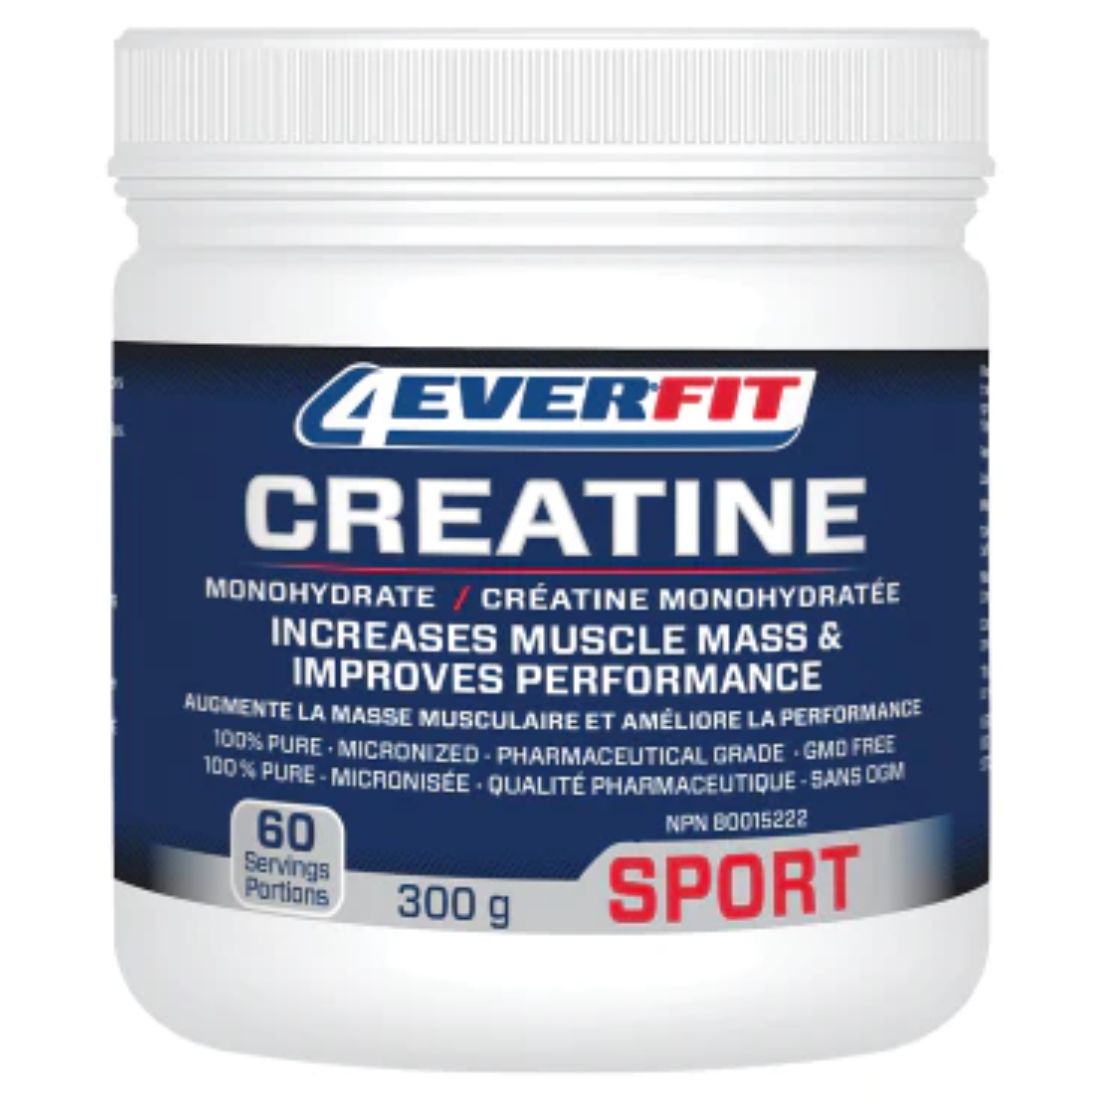 4Ever Fit Creatine Monohydrate, 100% Pure, 500g